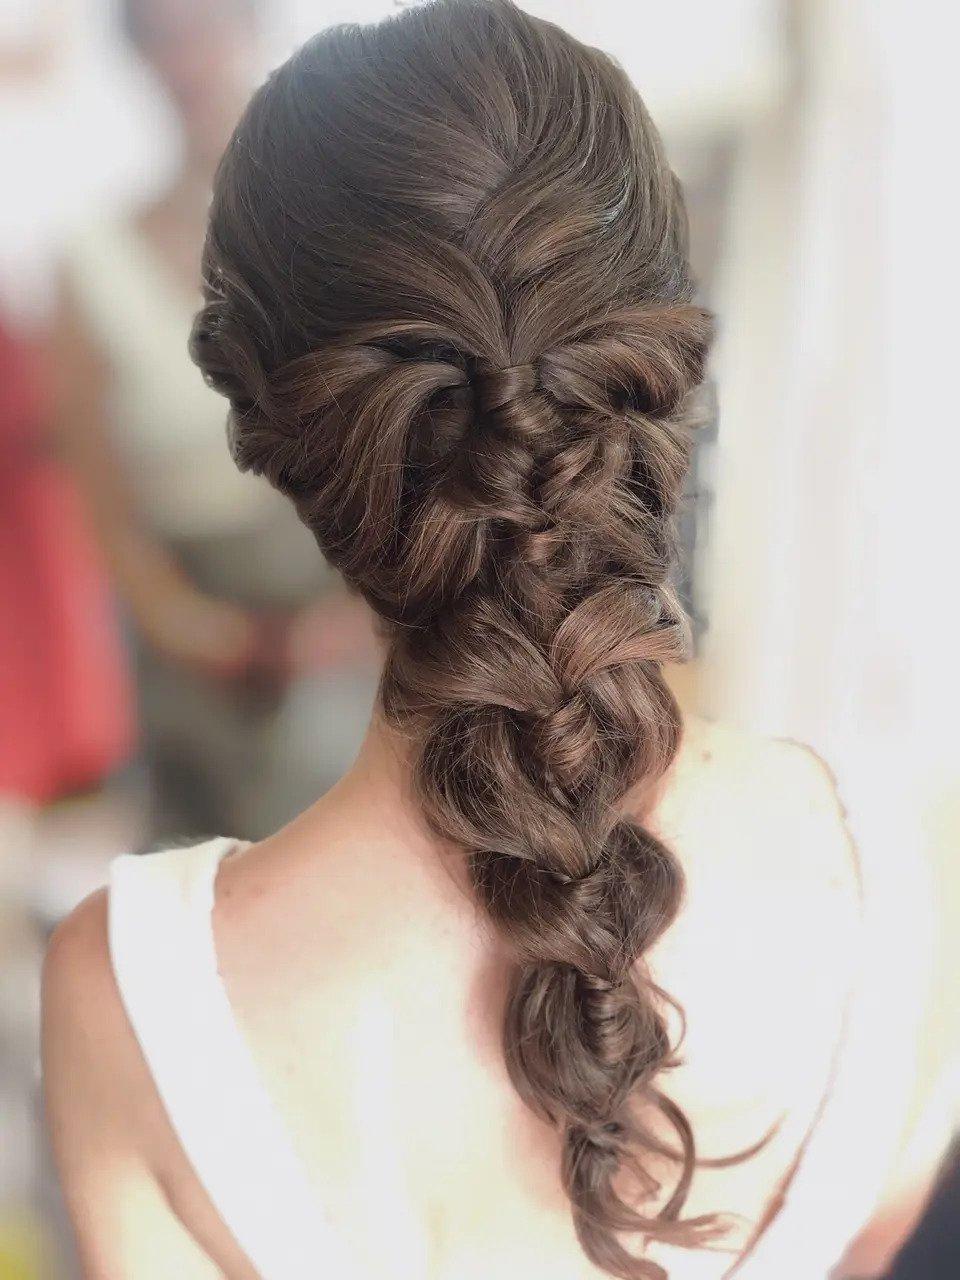 50 Breathtaking Wedding Hairstyles to Rock on Your Big Day - Hair Adviser